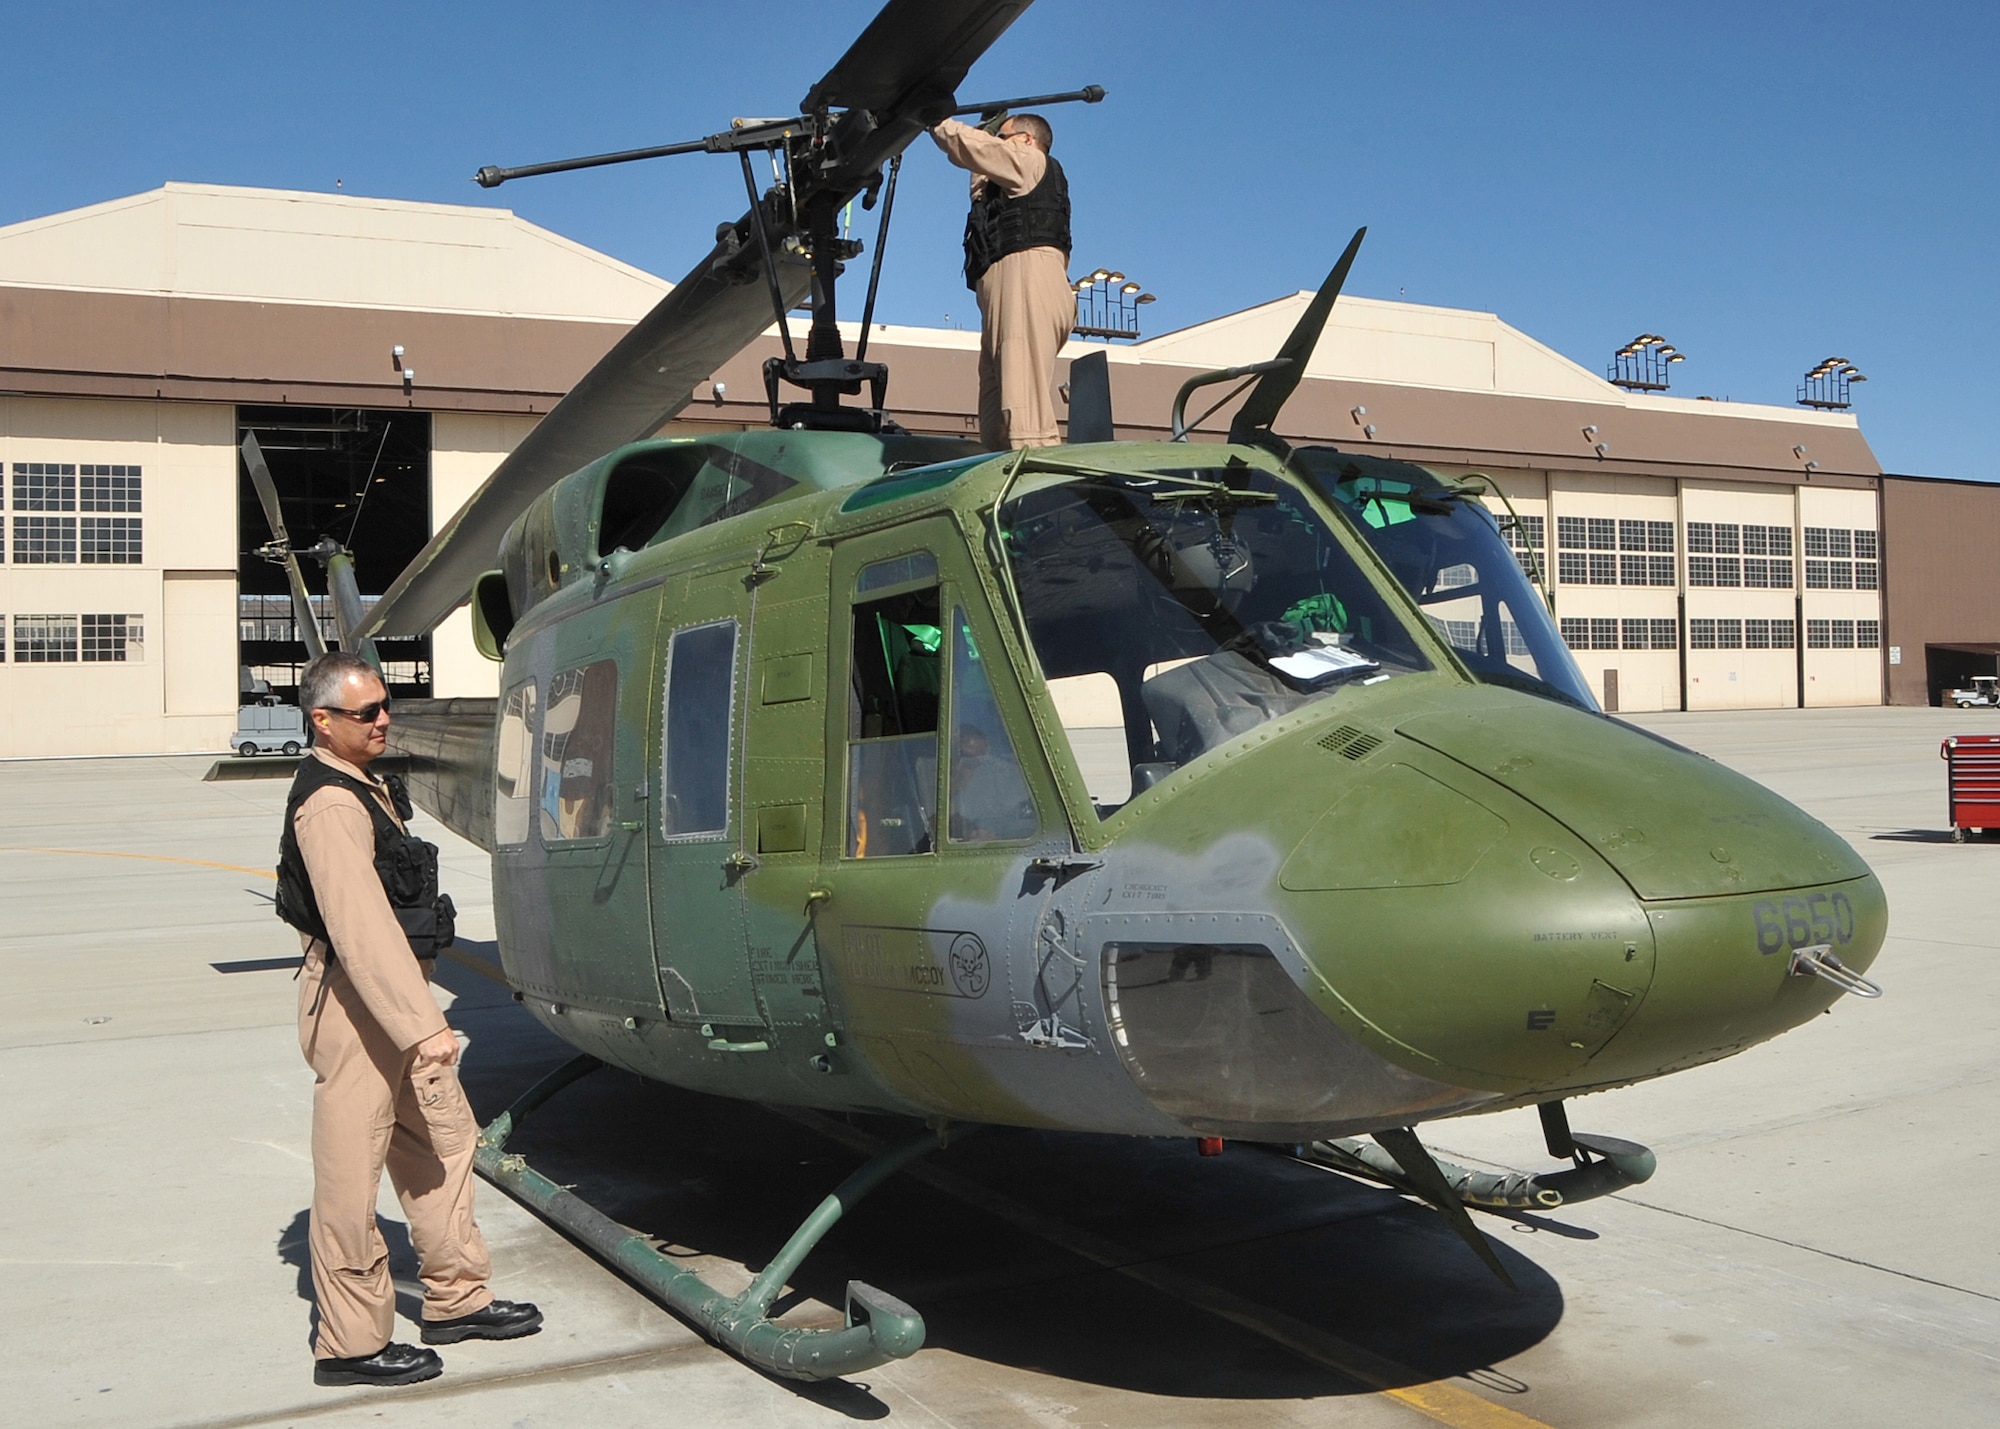 Retired Lt. Col. Kenneth Witte, left, along with retired Master Sgt. Robb Klein, right, performed a preflight inspection of the “Huey” helicopter before it embarked on its historic journey.